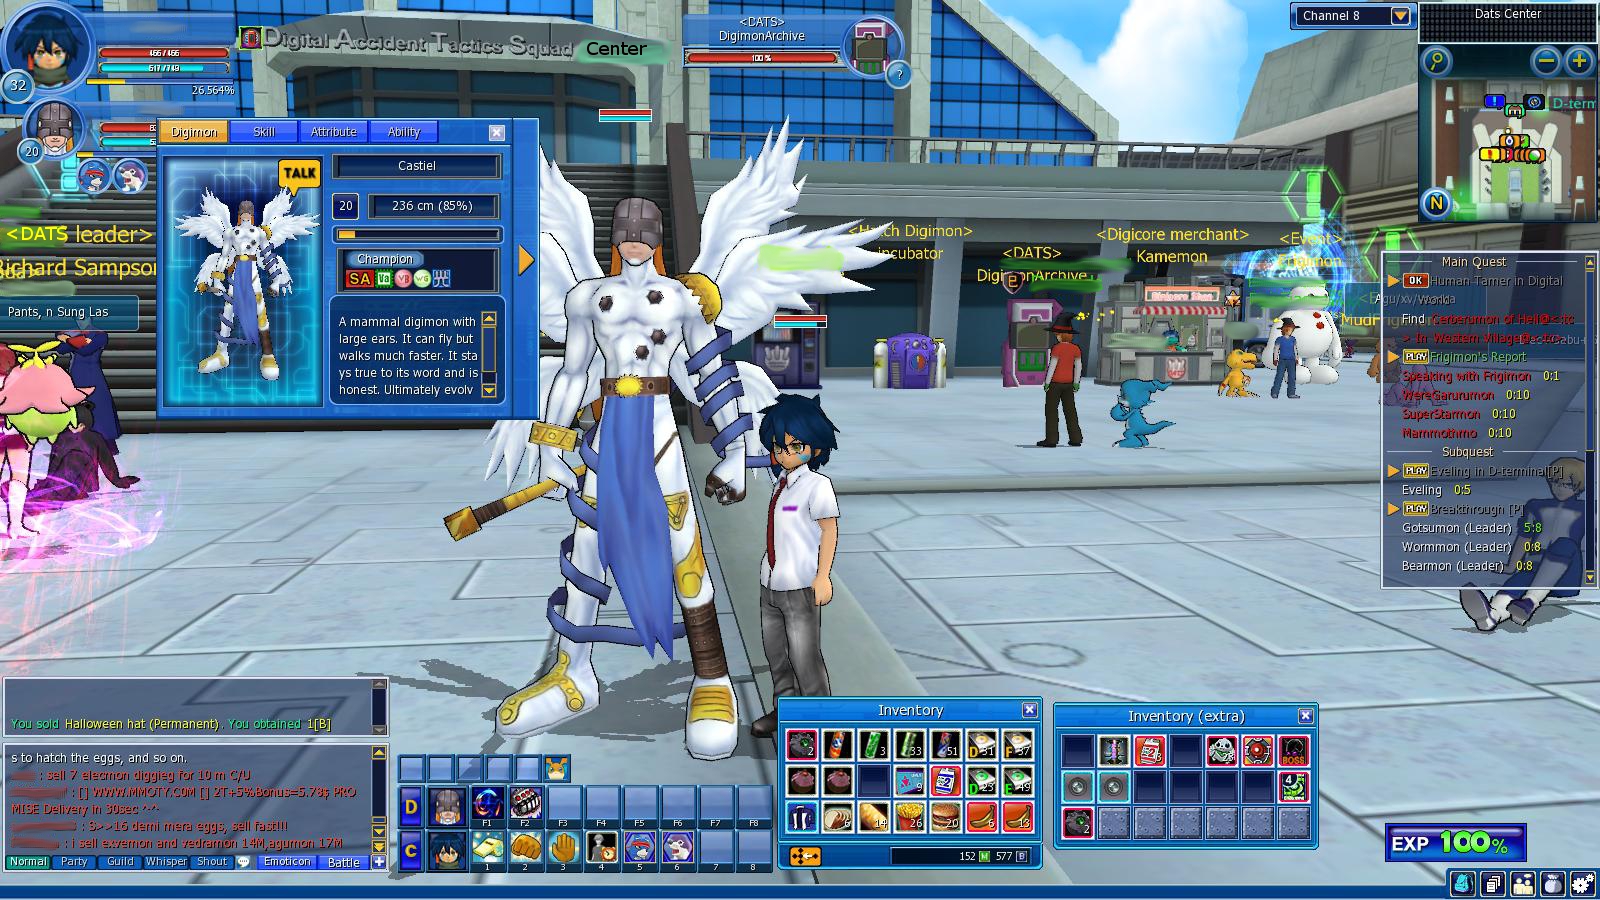 June 14, 2016 Patch - Digimon Masters Online Wiki - DMO Wiki